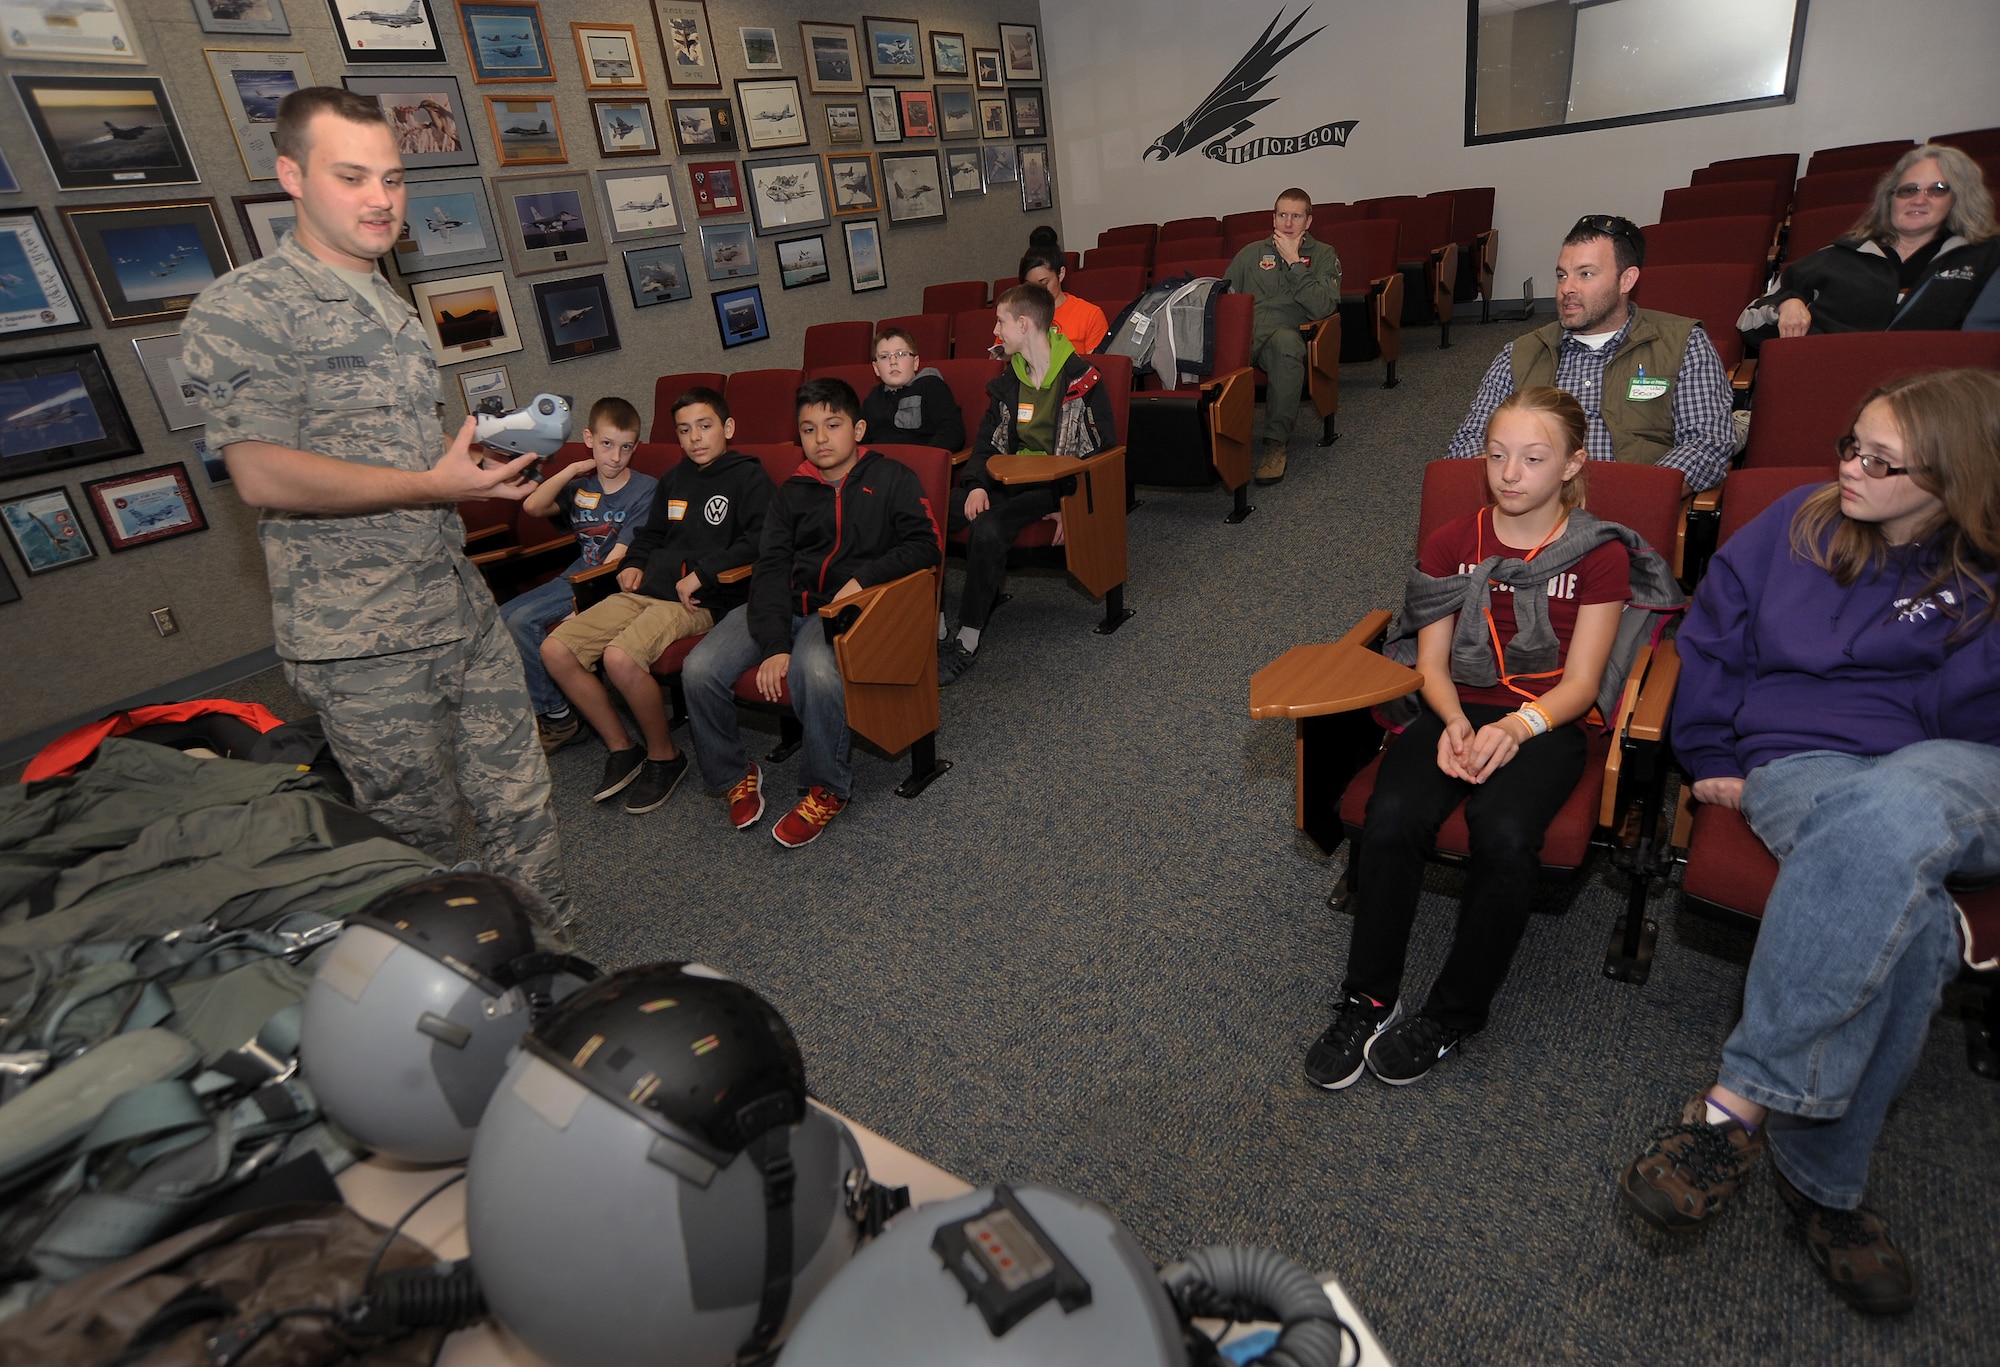 Oregon Air National Guard Airman 1st Class Joseph Stitzel, assigned to the 123rd Fighter Squadron, 142nd Fighter Wing as an aircrew flight equipment technician, left, displays and describes some of the necessary flight gear used by Air Force pilots to some of the kids that attended, ‘Kids Day at PANG,’ April 25, 2015, Portland Air National Guard Base, Ore. The Oregon National Guard opened the Portland Air Base to children of military members for a special day of activities highlighting “The Month of the Military Child,” designated since 1986 by the Department of Defense as way to recognize the contribution and personal sacrifices children make to the military. (U.S. Air National Guard photo by Tech. Sgt. John Hughel, 142nd Fighter Wing Public Affairs/Released)